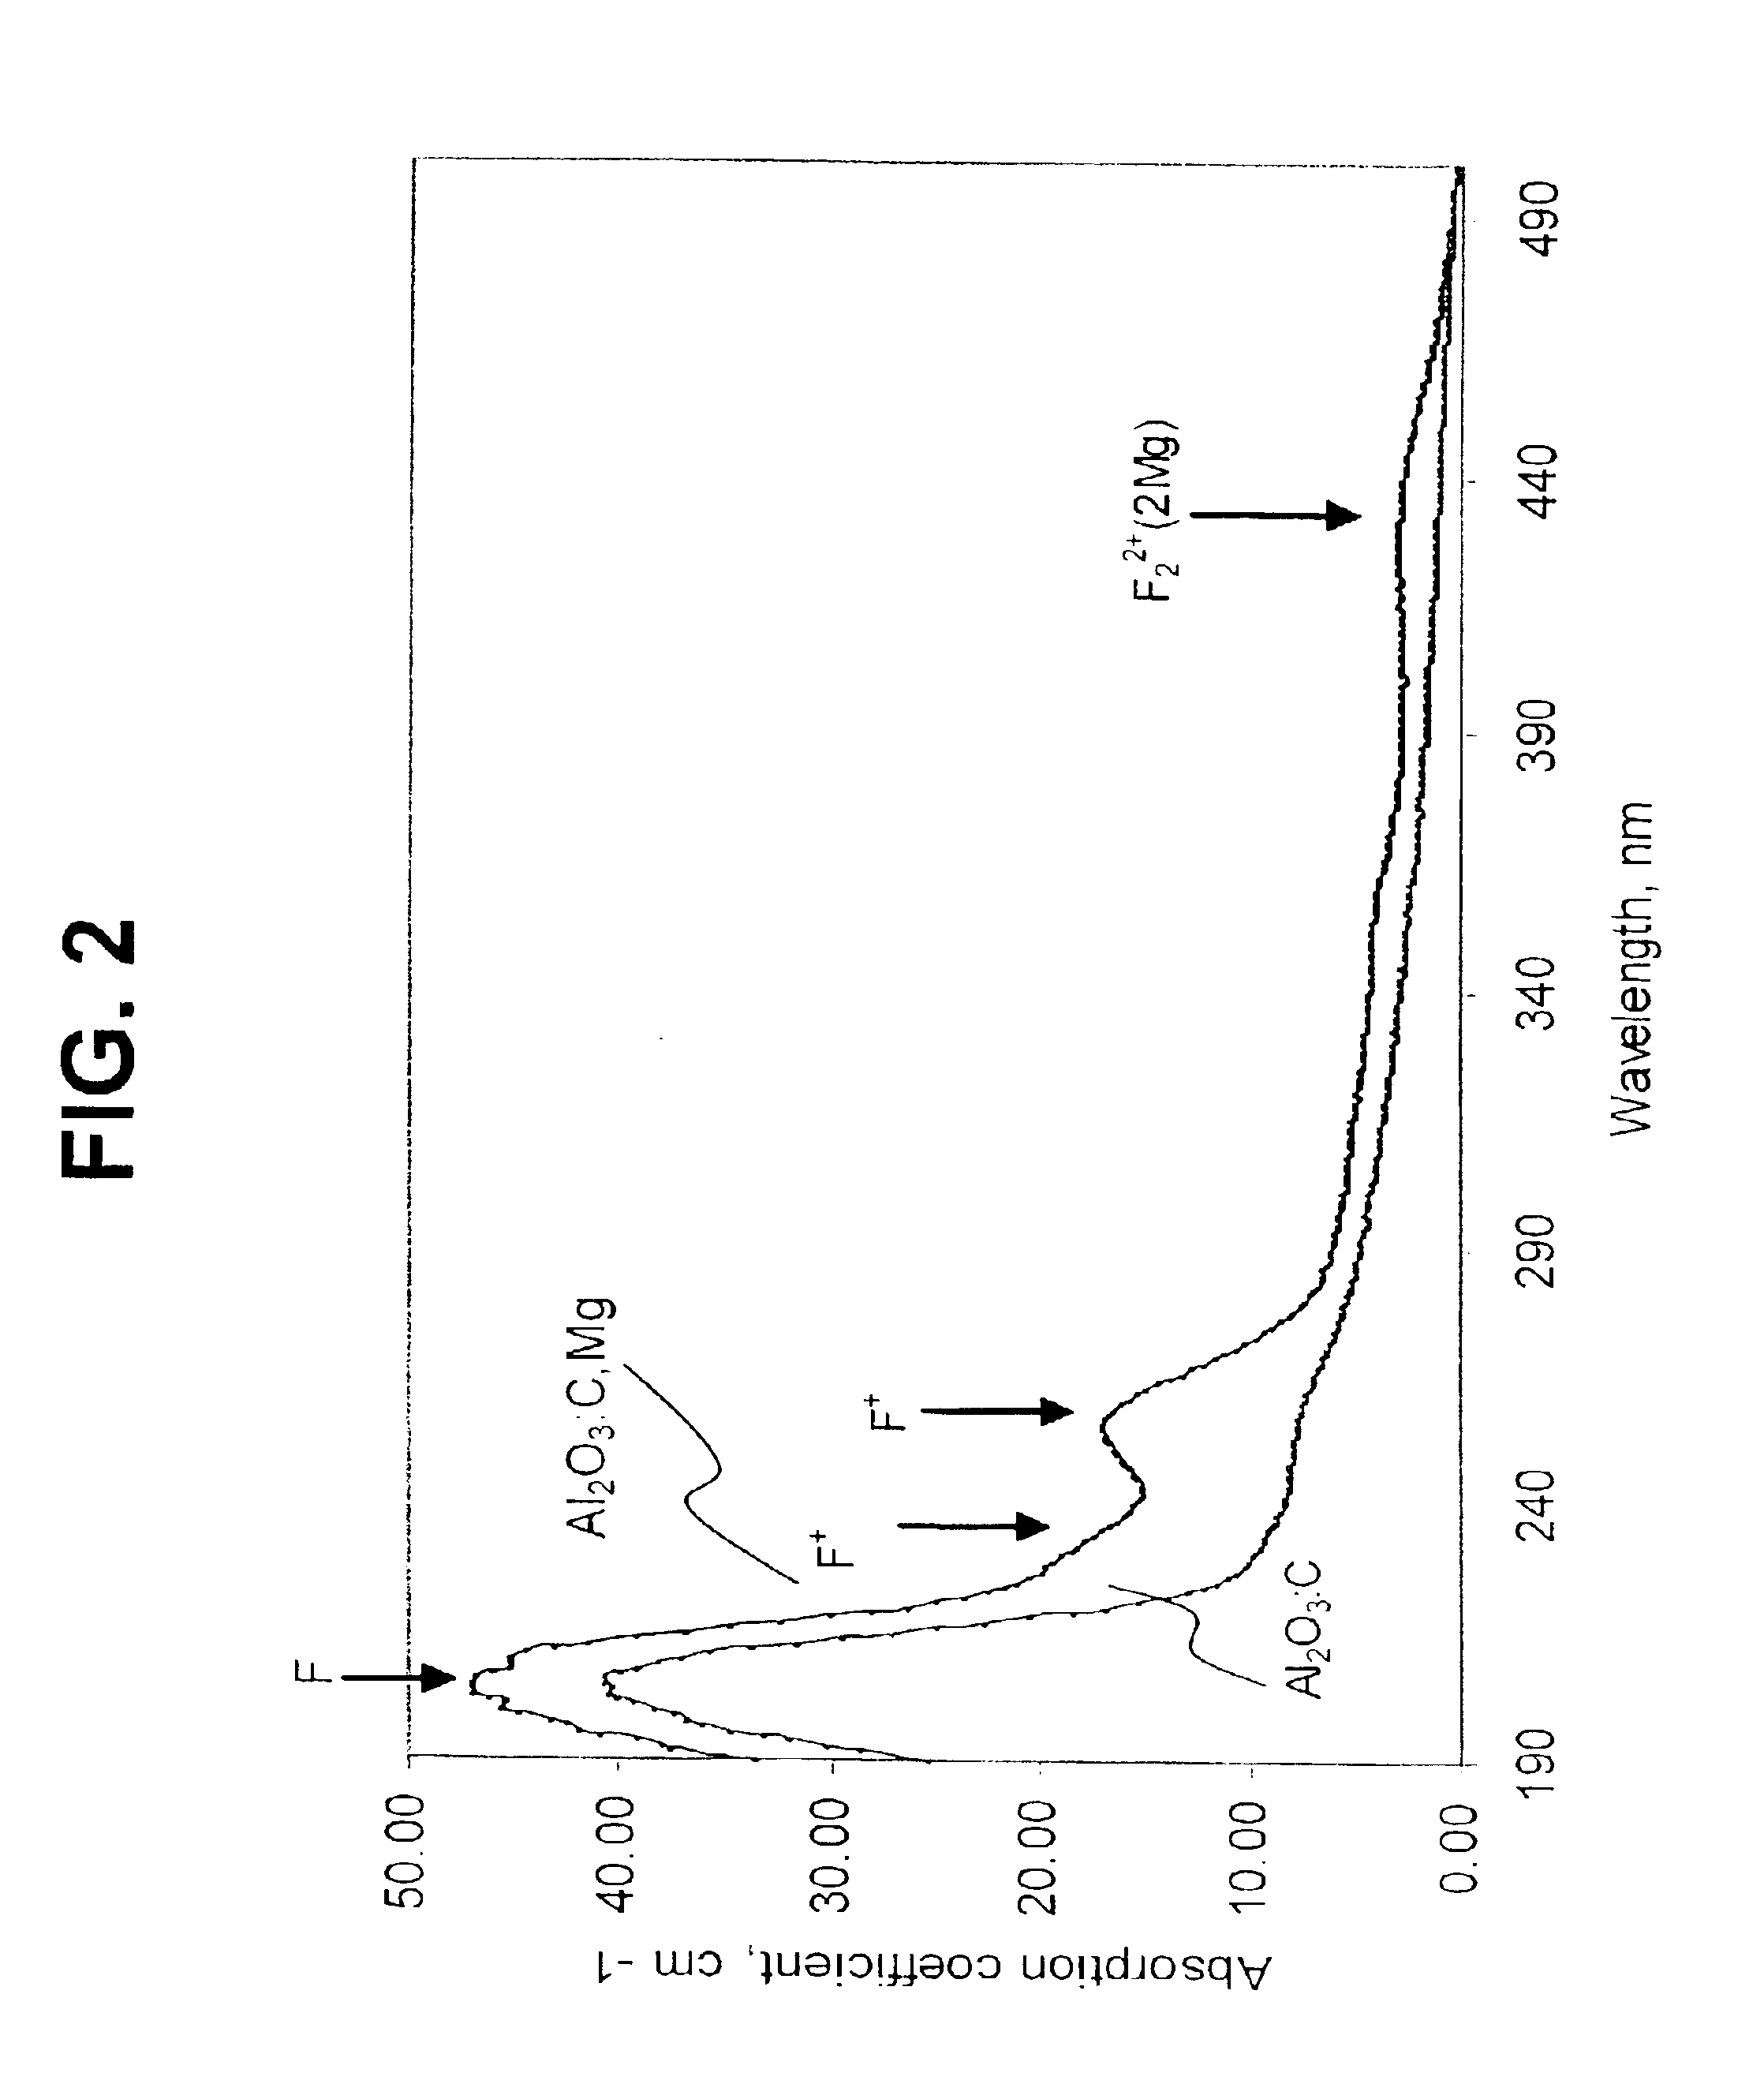 Method for thermally erasing information stored in an aluminum oxide data storage medium